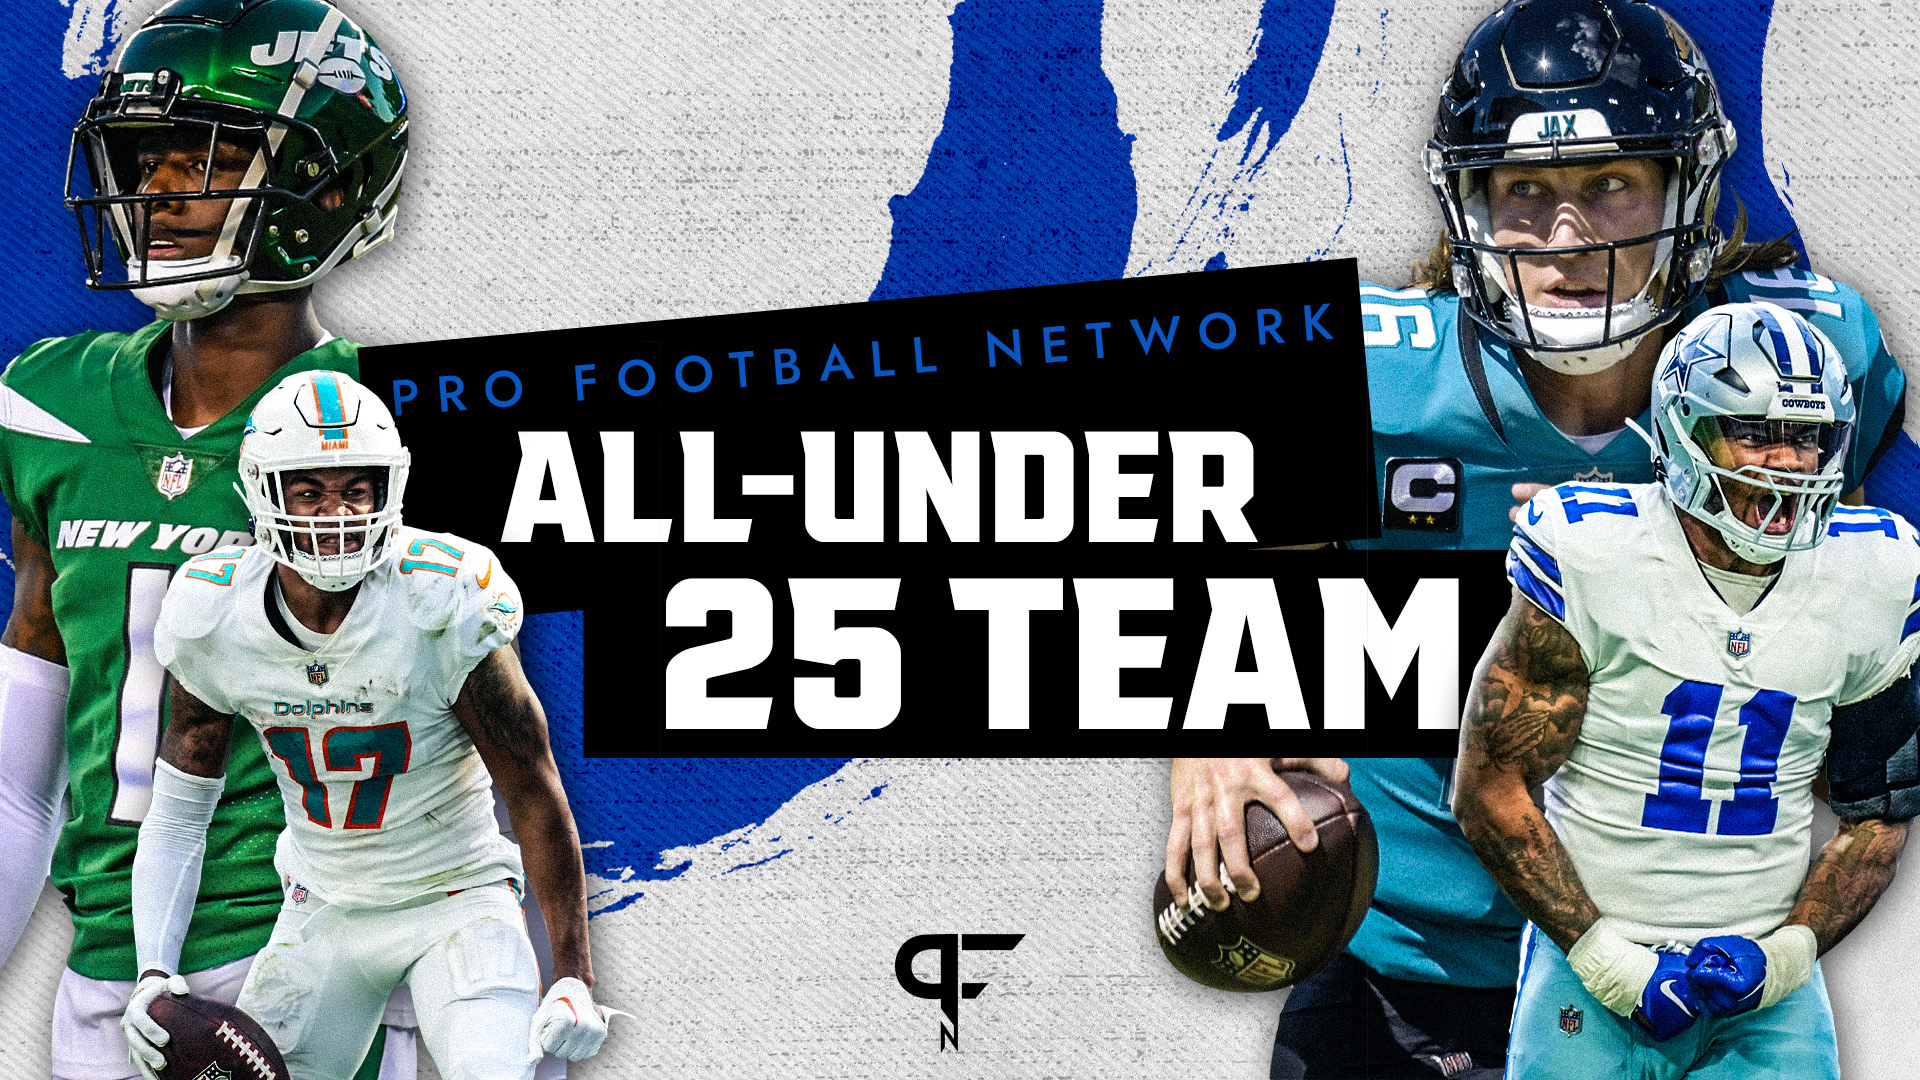 Pro Football Network's top NFL players under the age of 25 is unveiled.